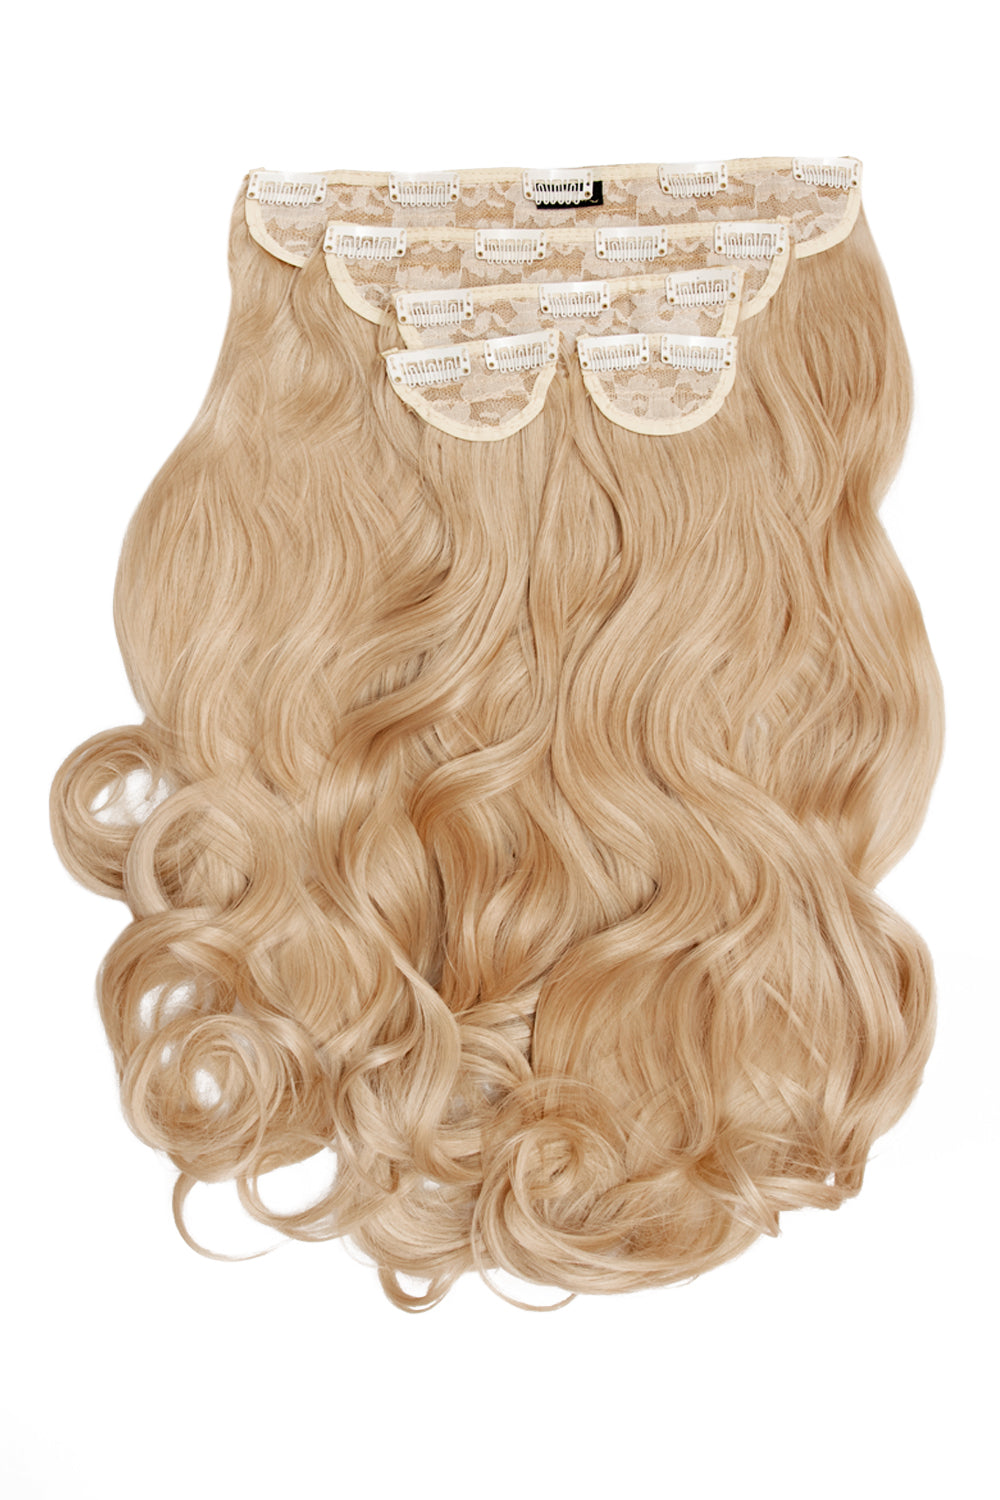 Super Thick 22" 5 Piece Curly Clip In Hair Extensions - Honey Blonde